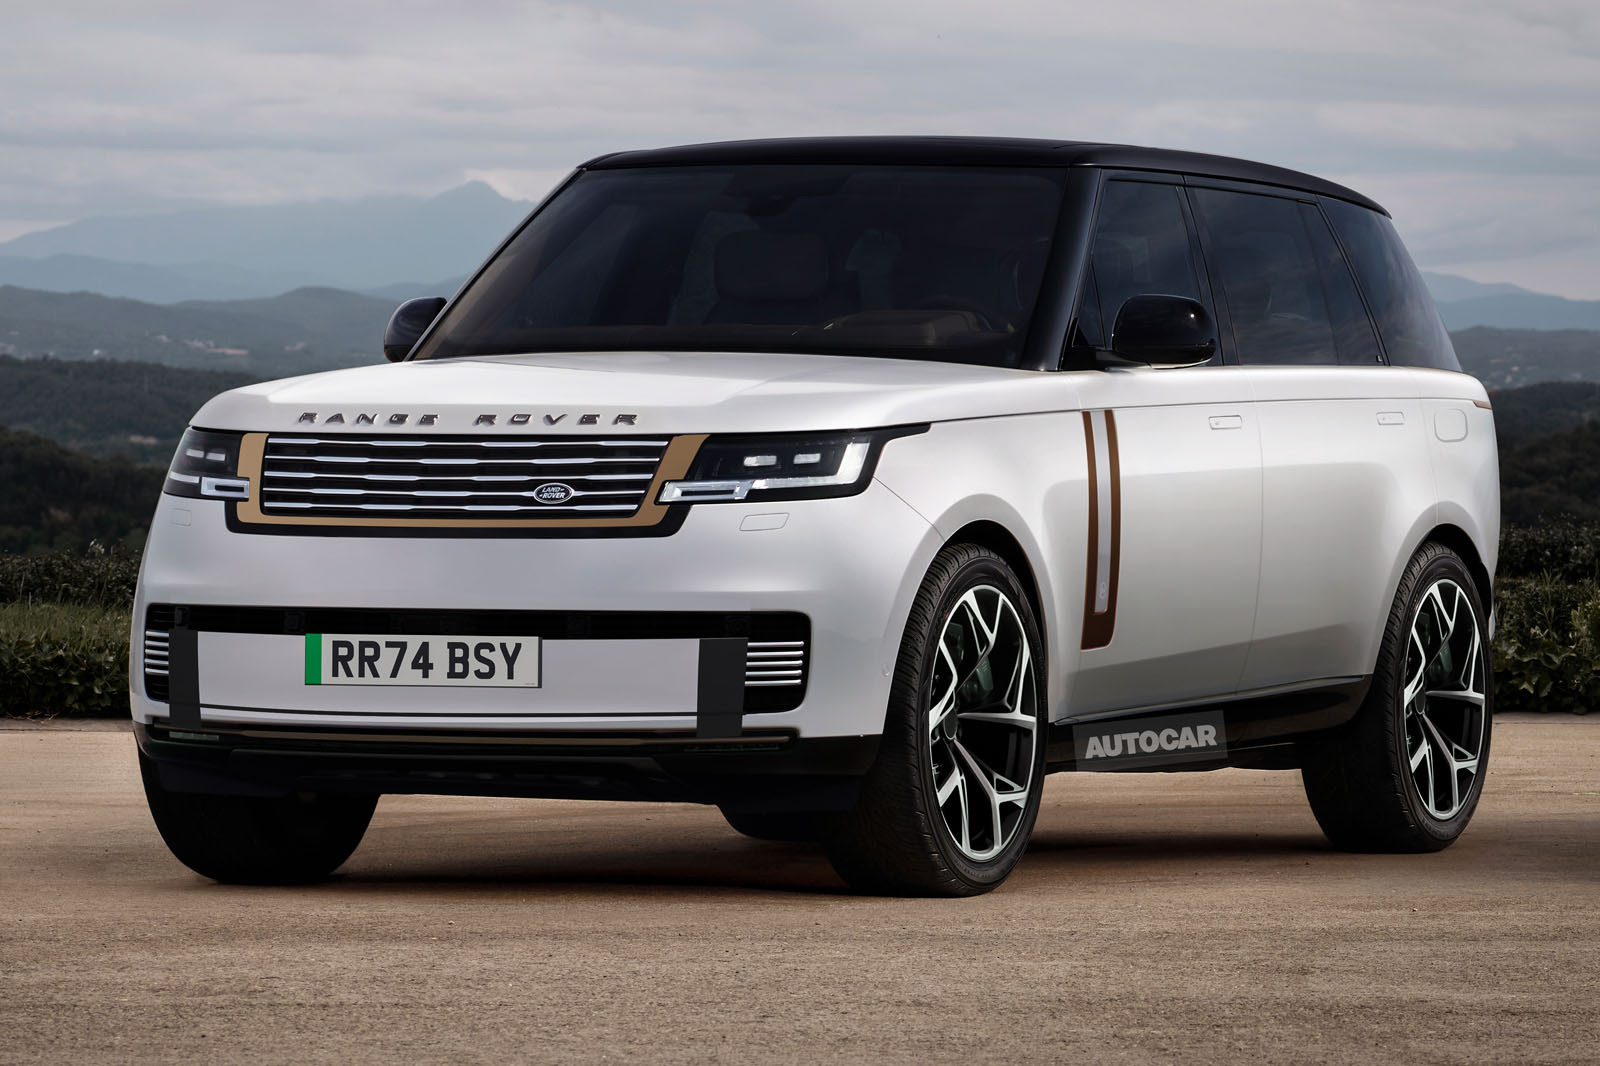 Range Rover Electric waiting list already at 16,000